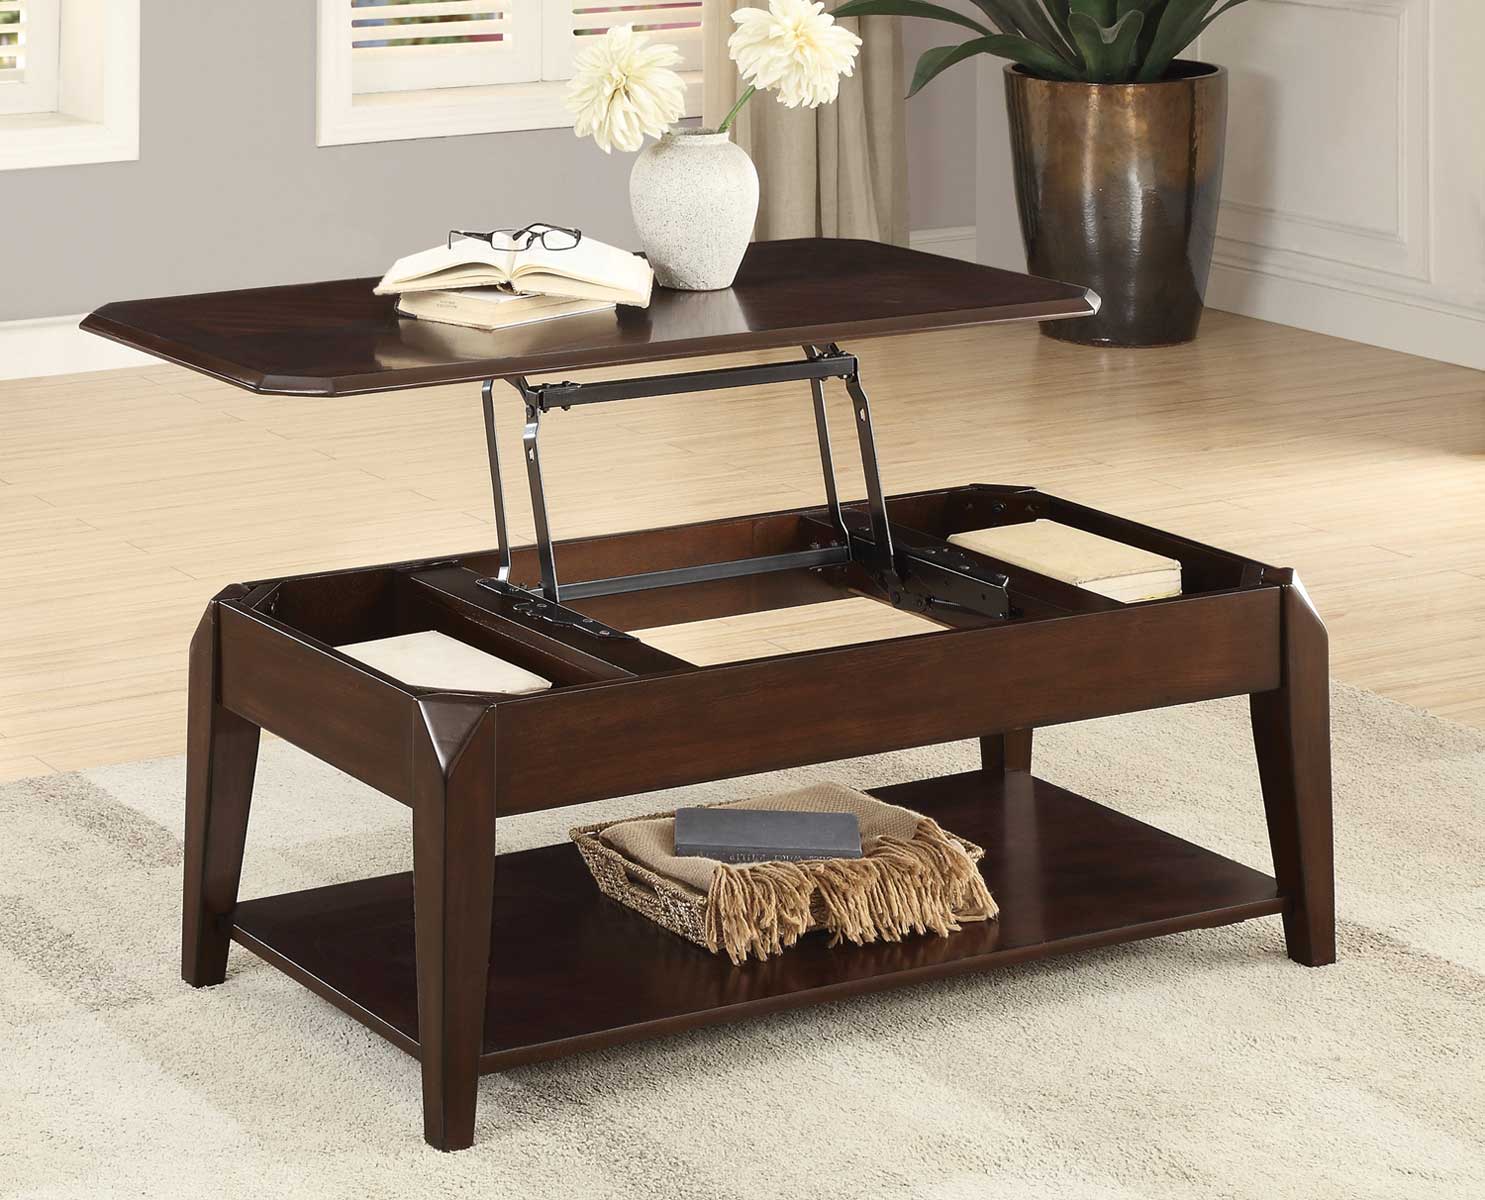 Homelegance Sikeston Cocktail Table with Lift Top on Casters - Warm Cherry